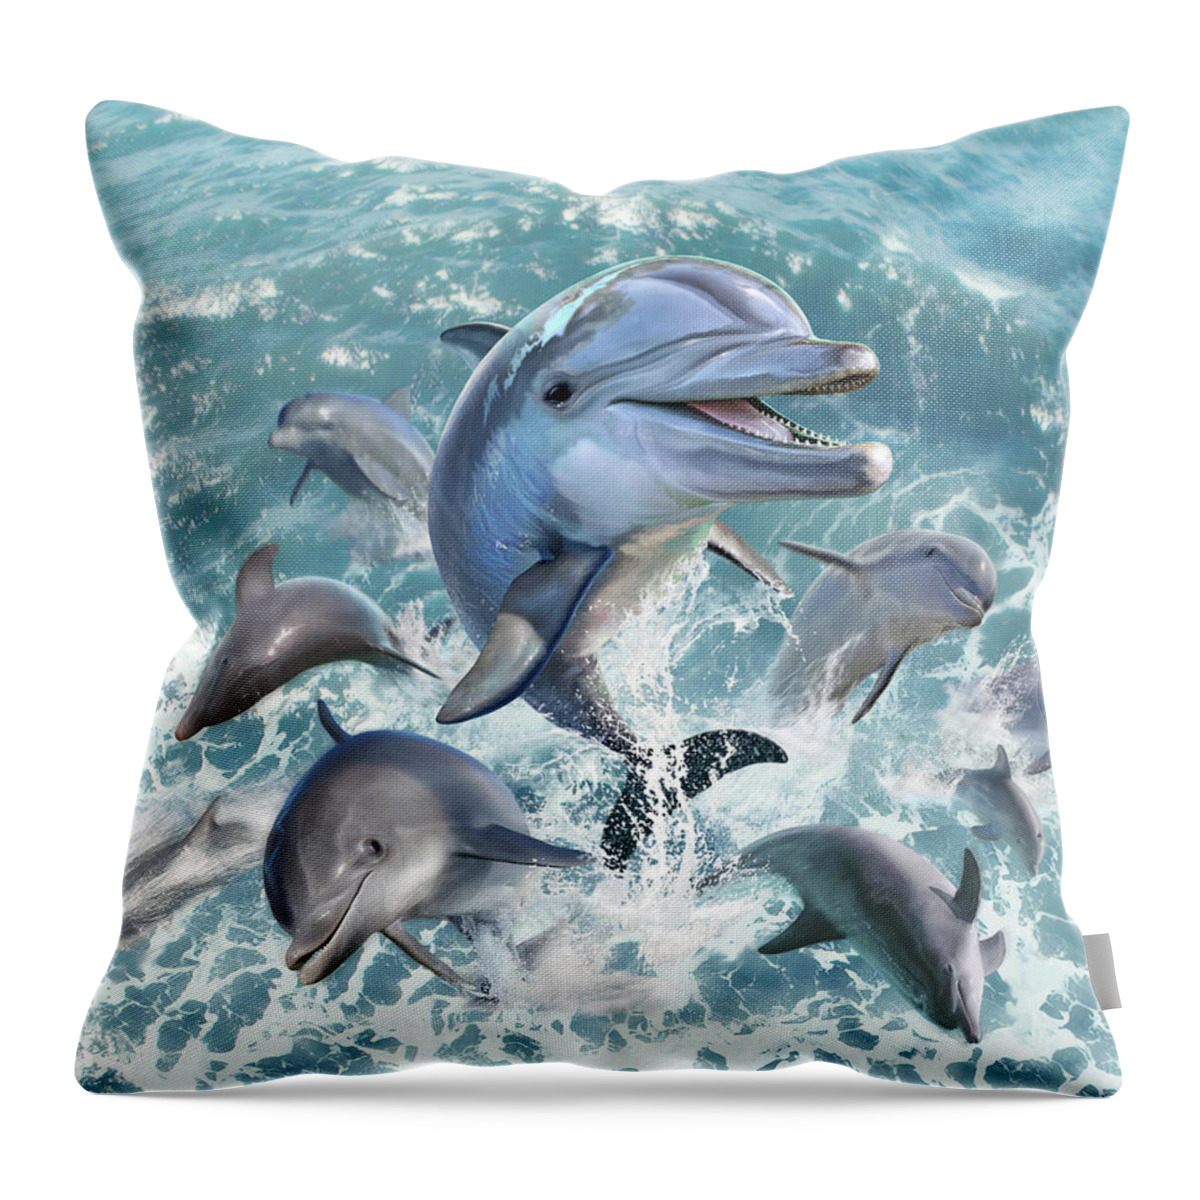 Dolphin Throw Pillow featuring the digital art Dolphin Jump by Jerry LoFaro